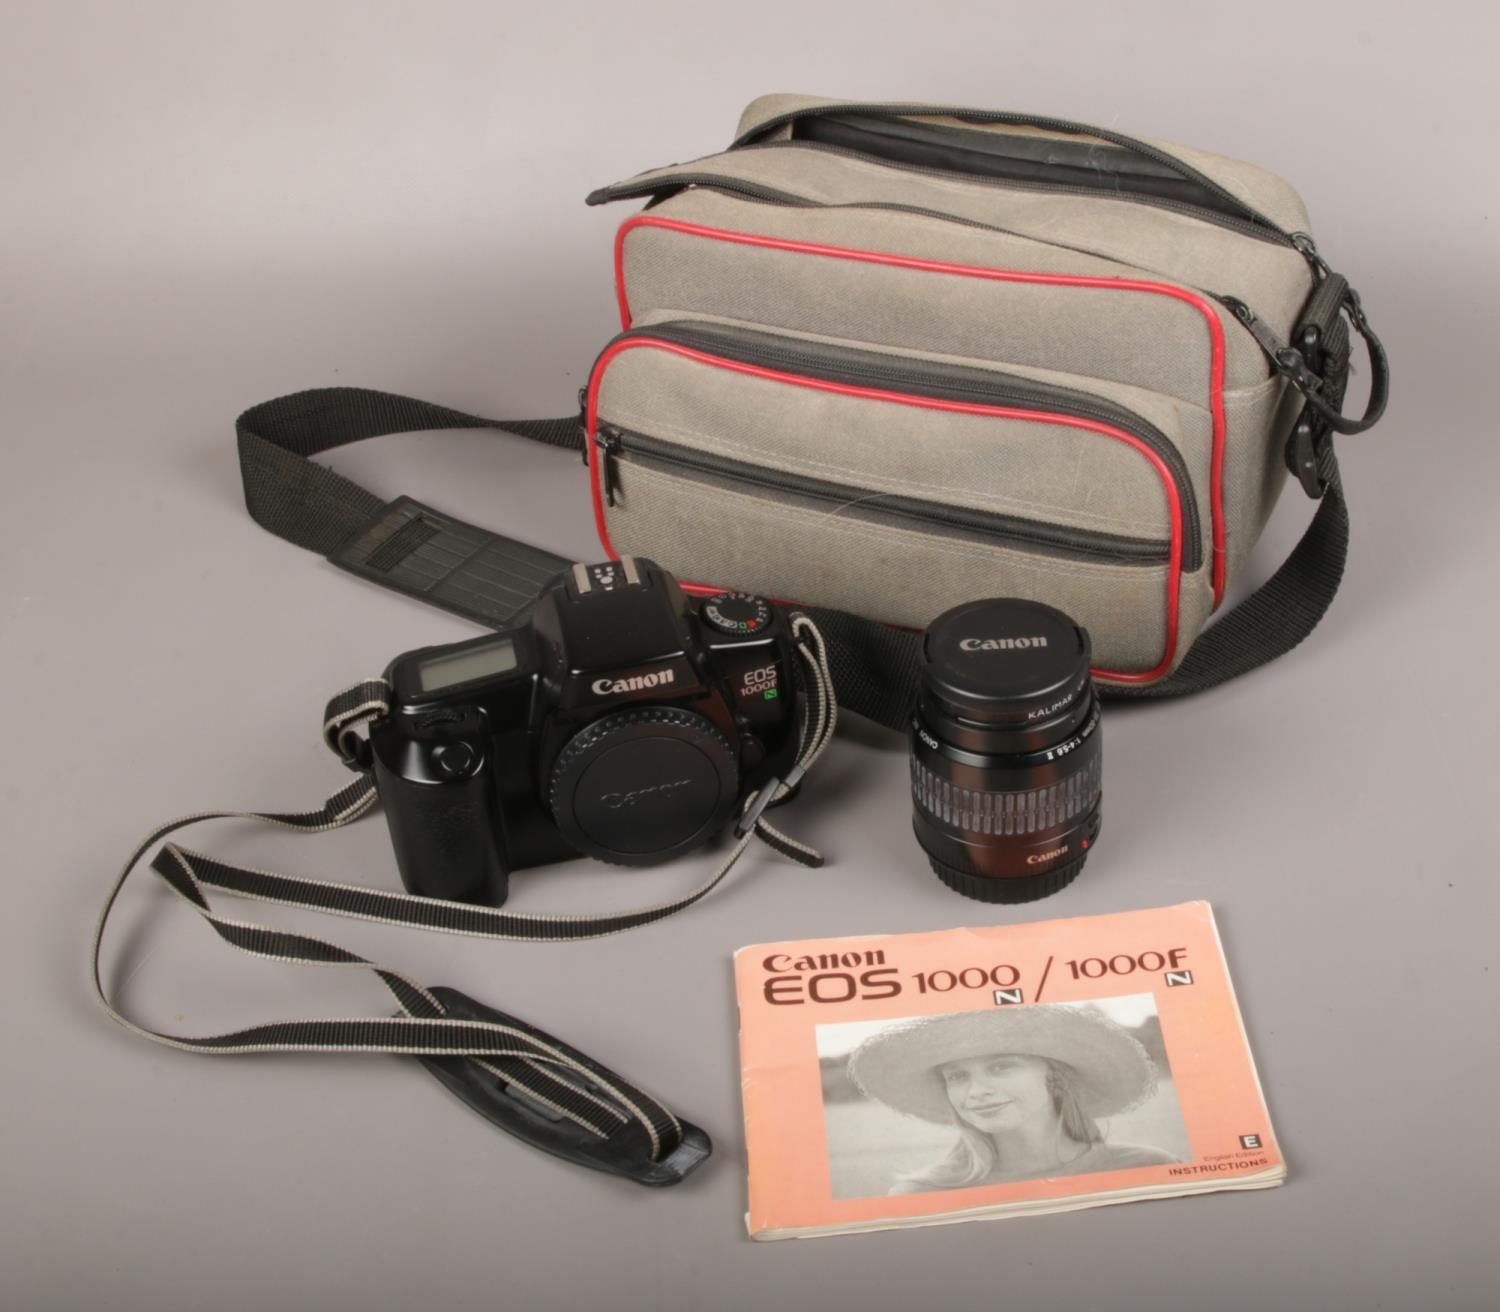 A Canon EOS 1000F 35mm SLR camera, along with a Canon EF 35mm-80mm lens and instruction manual.